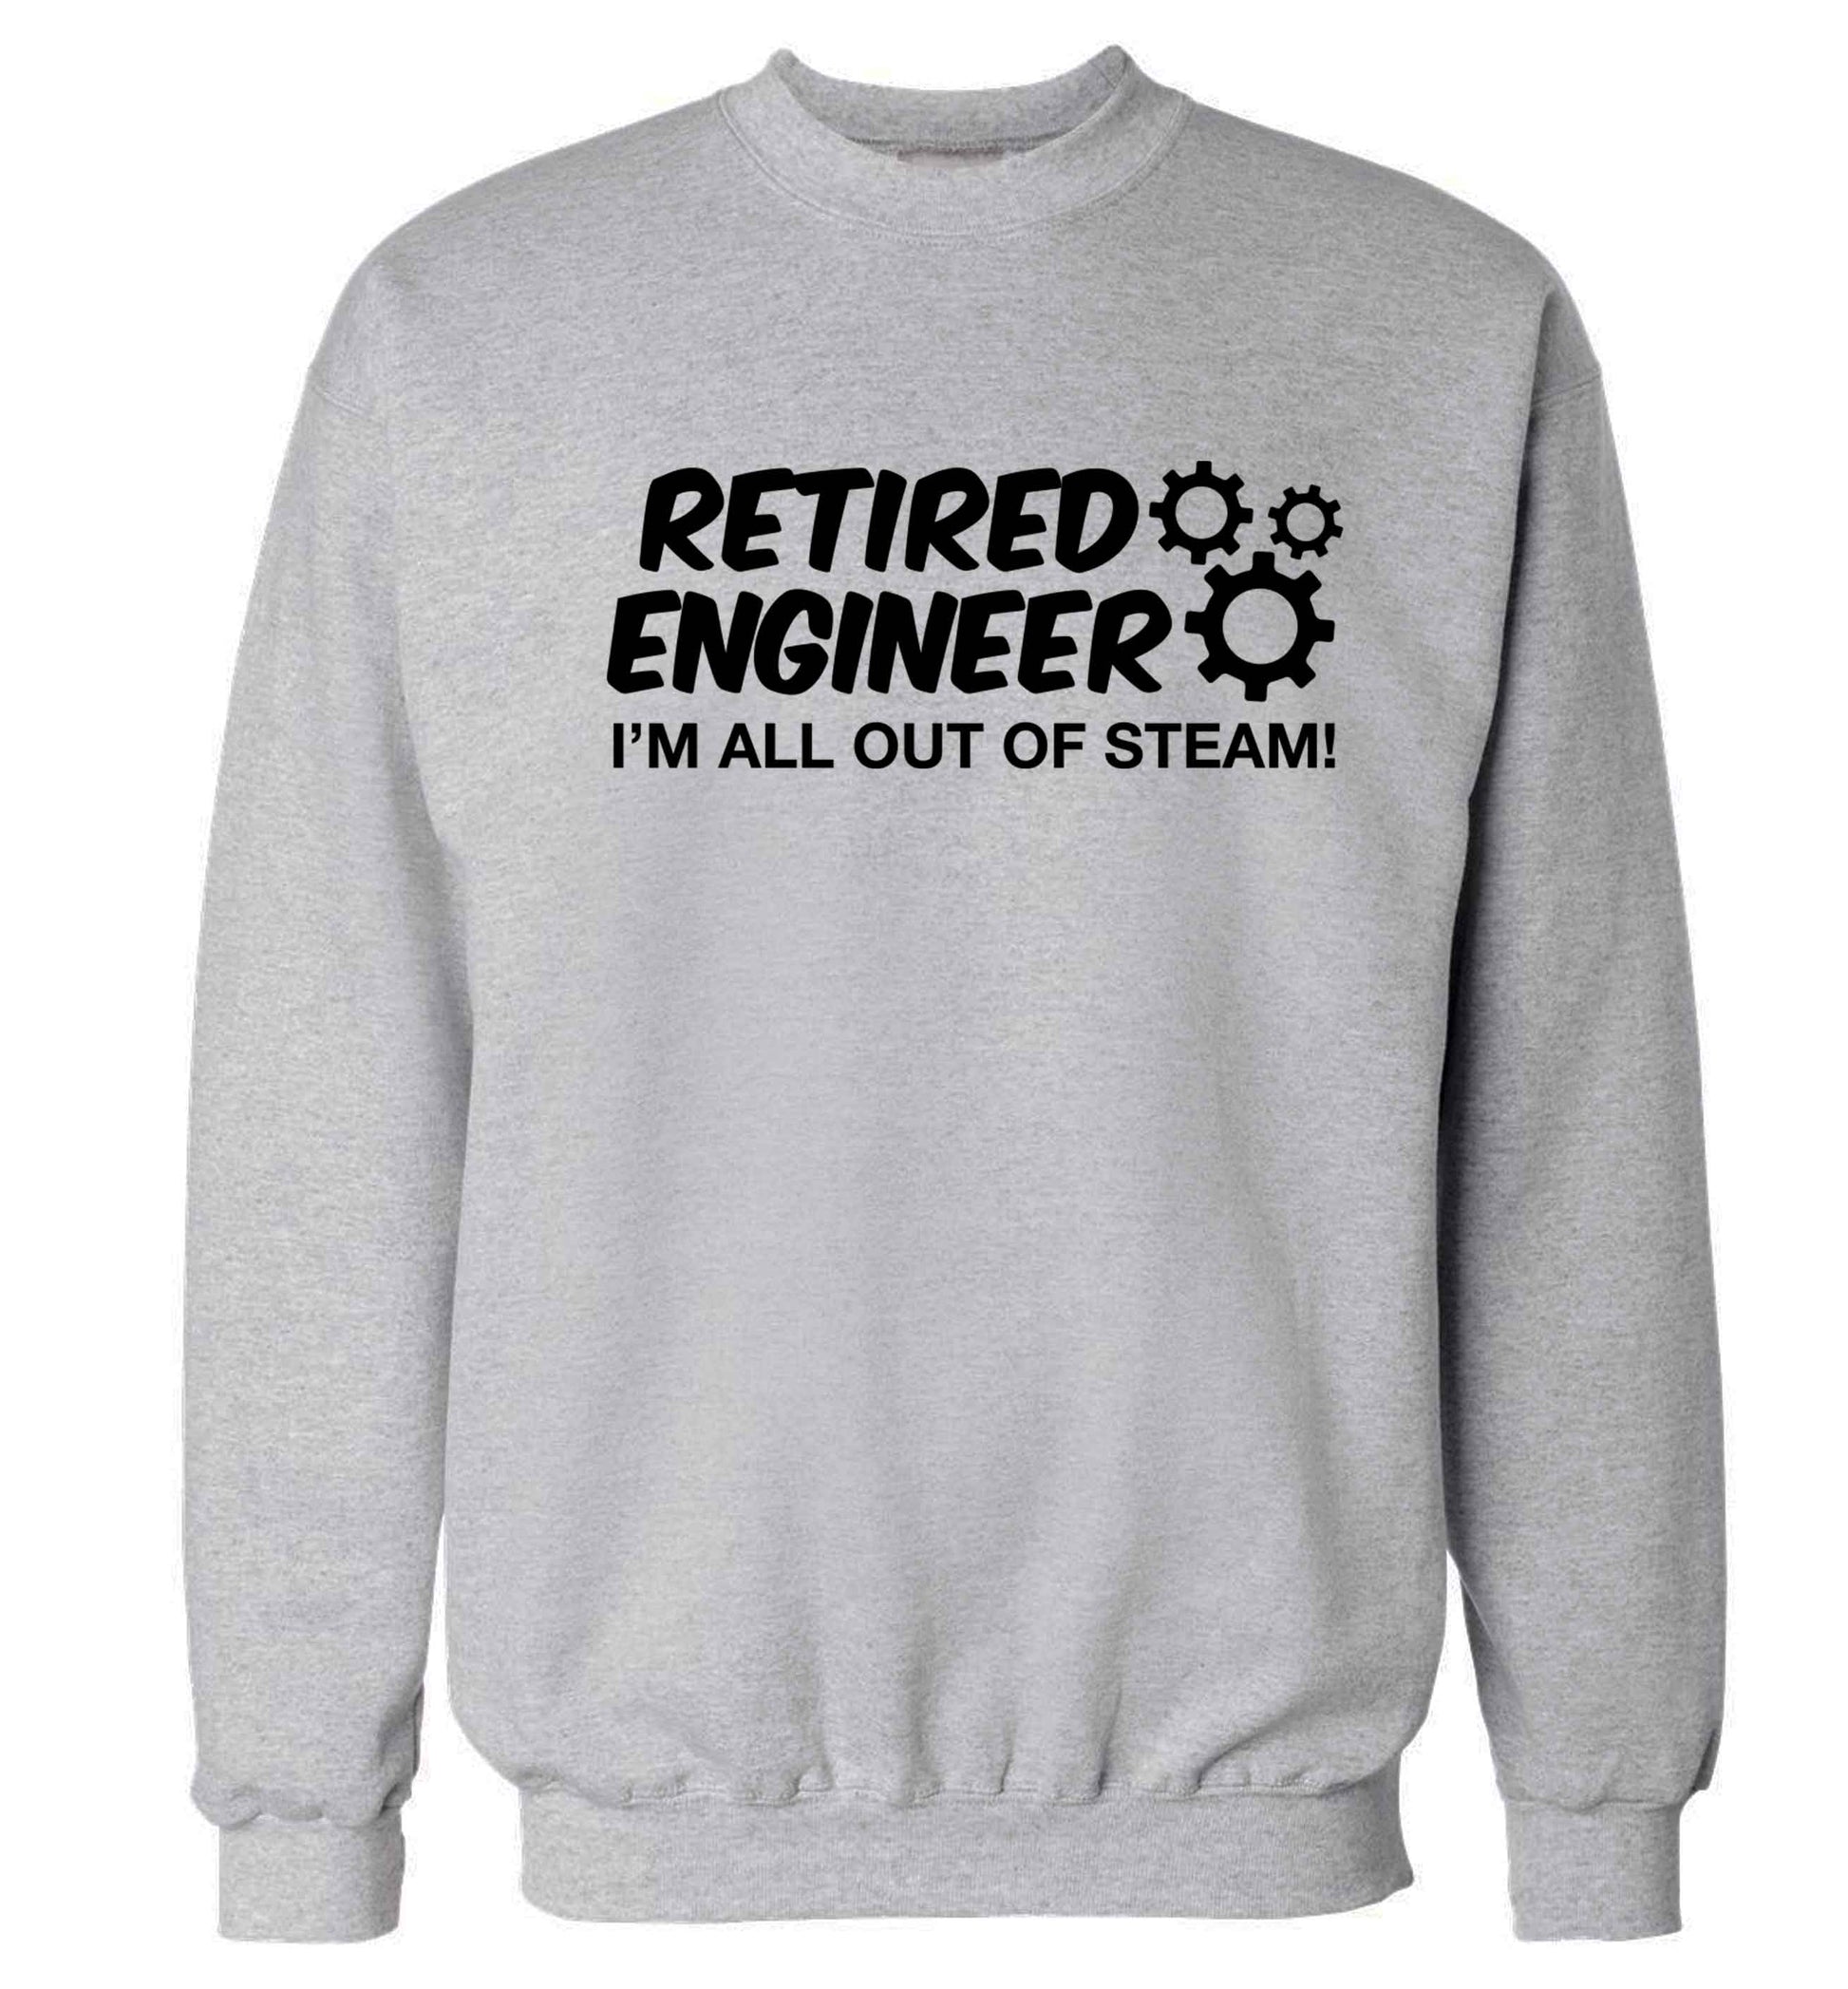 Retired engineer I'm all out of steam Adult's unisex grey Sweater 2XL